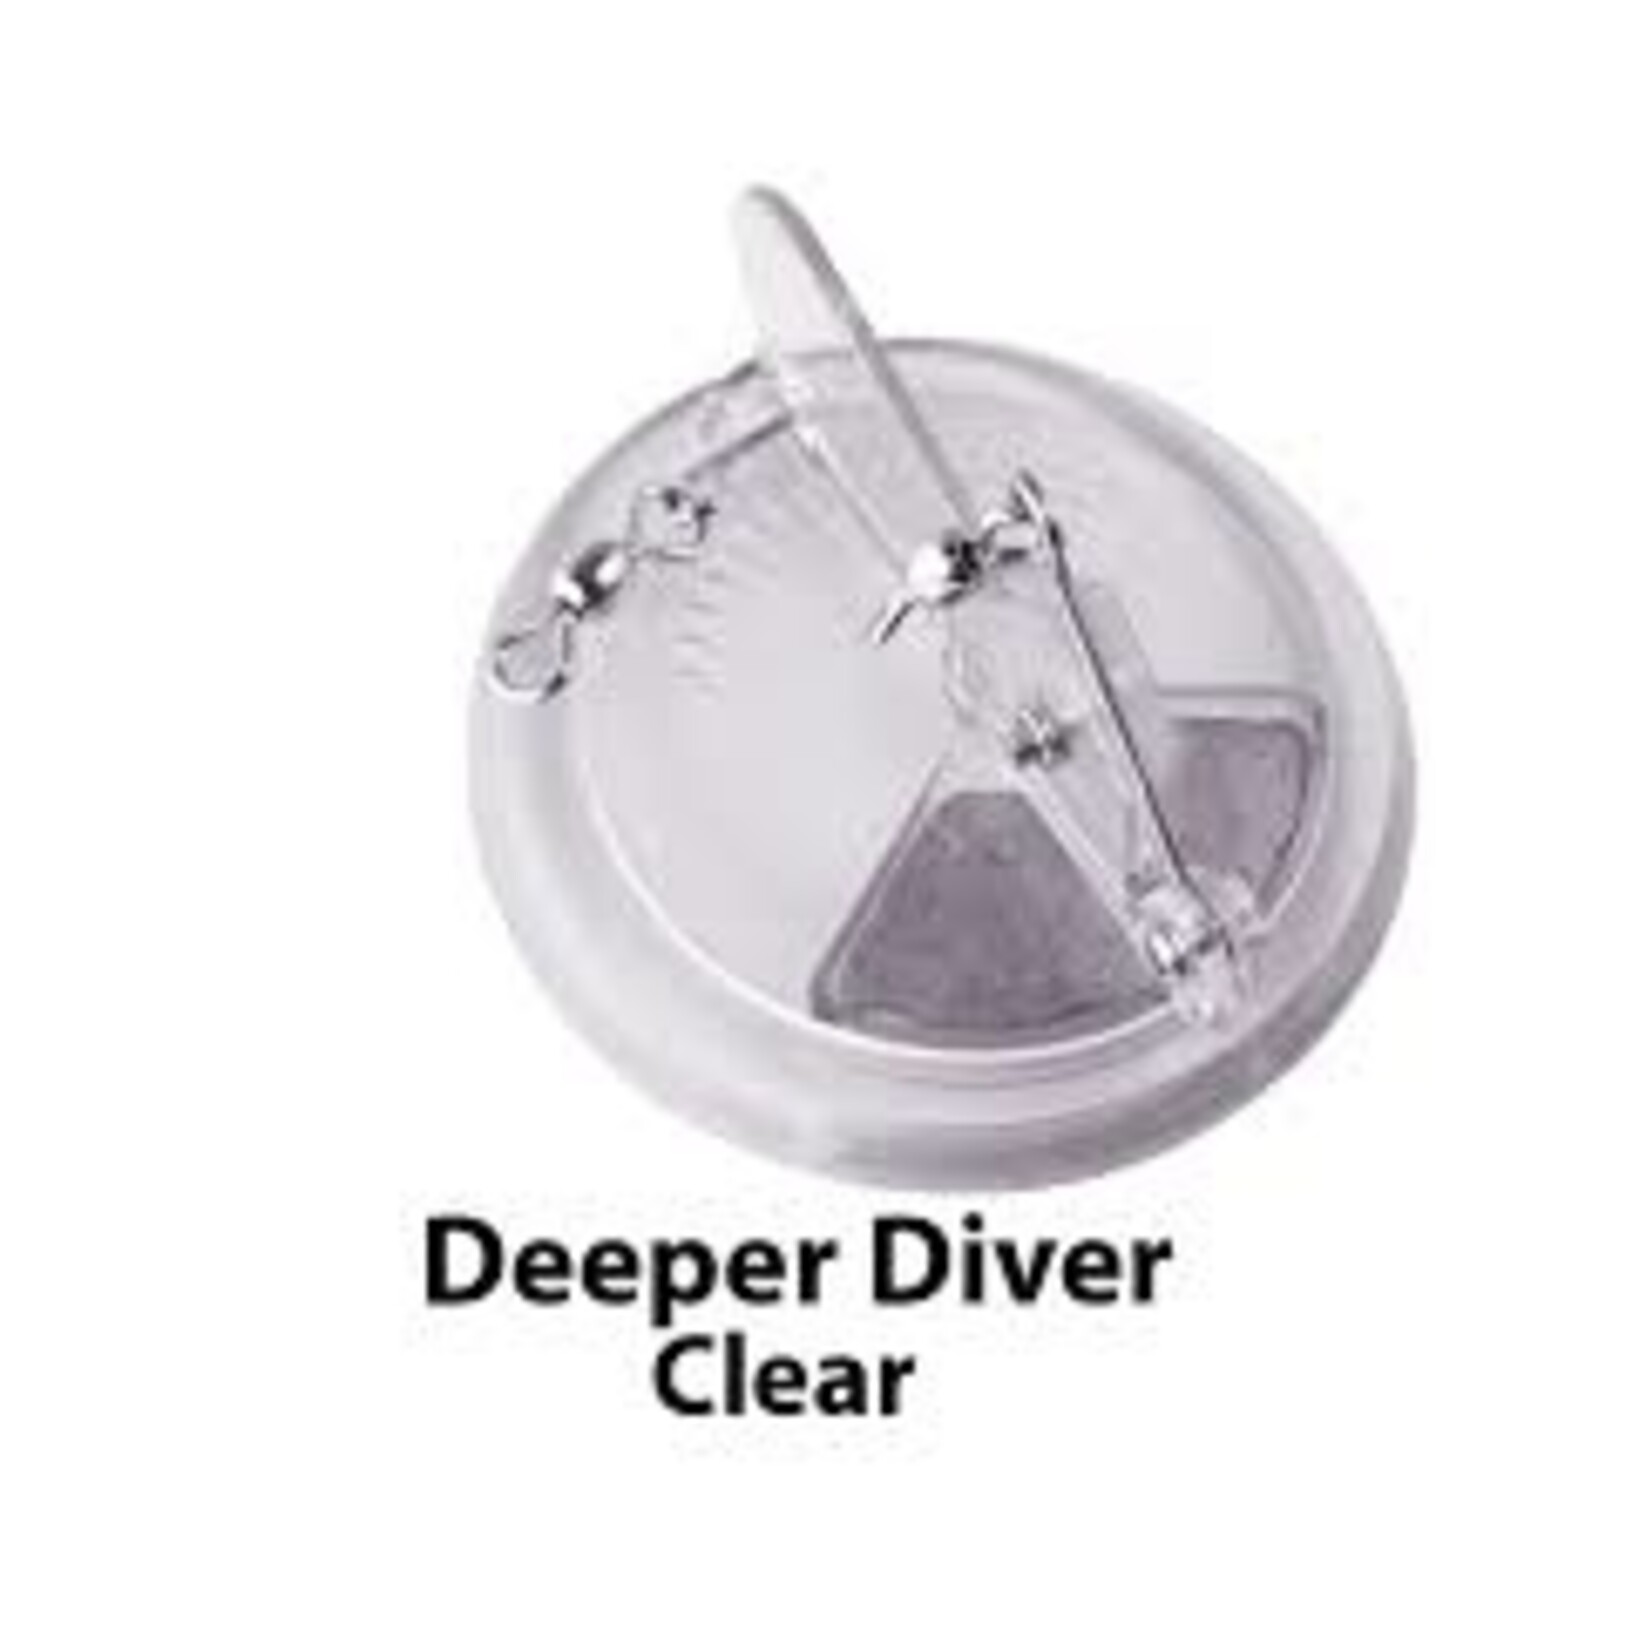 Dreamweaver Deeper Diver Trolling Diver – Natural Sports - The Fishing Store